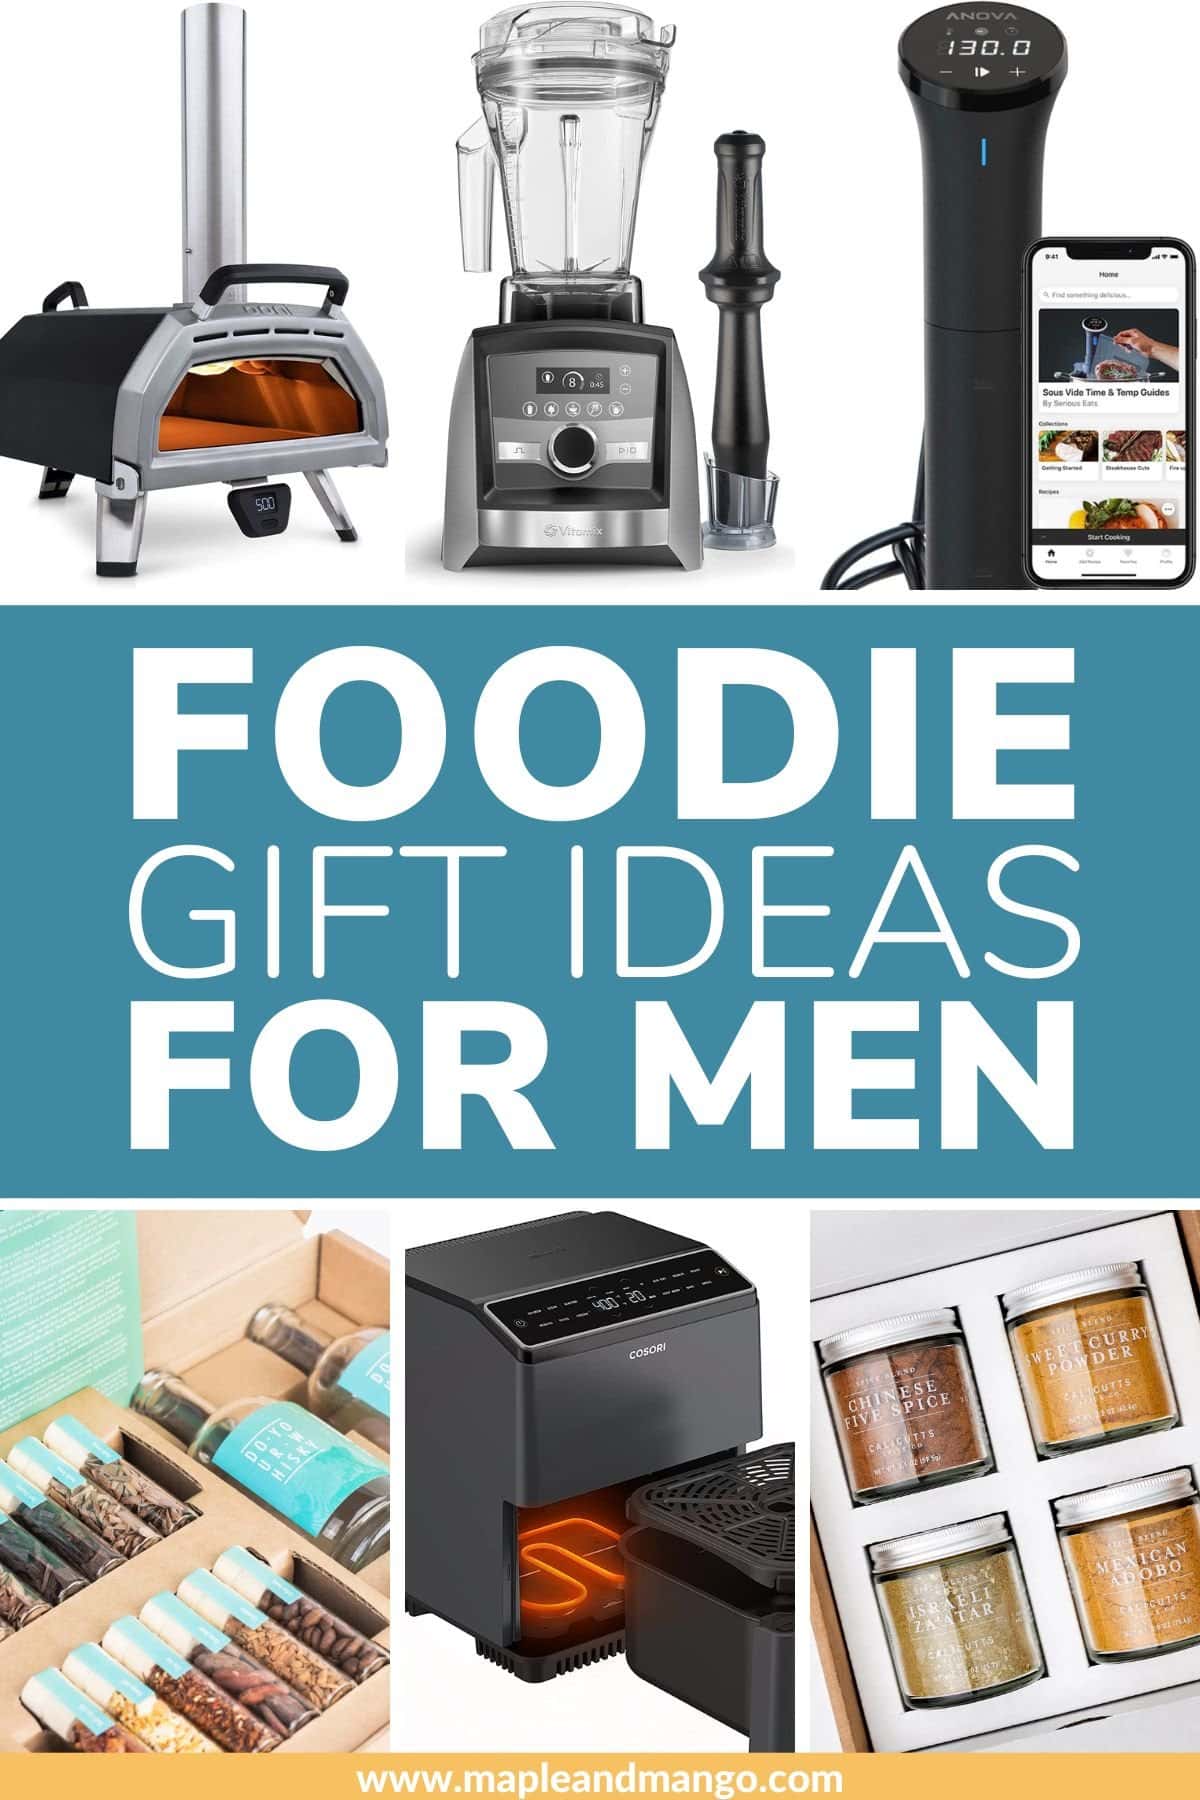 18 Foodie Gifts For Men Gifts For Men Who Cook   Maple + Mango